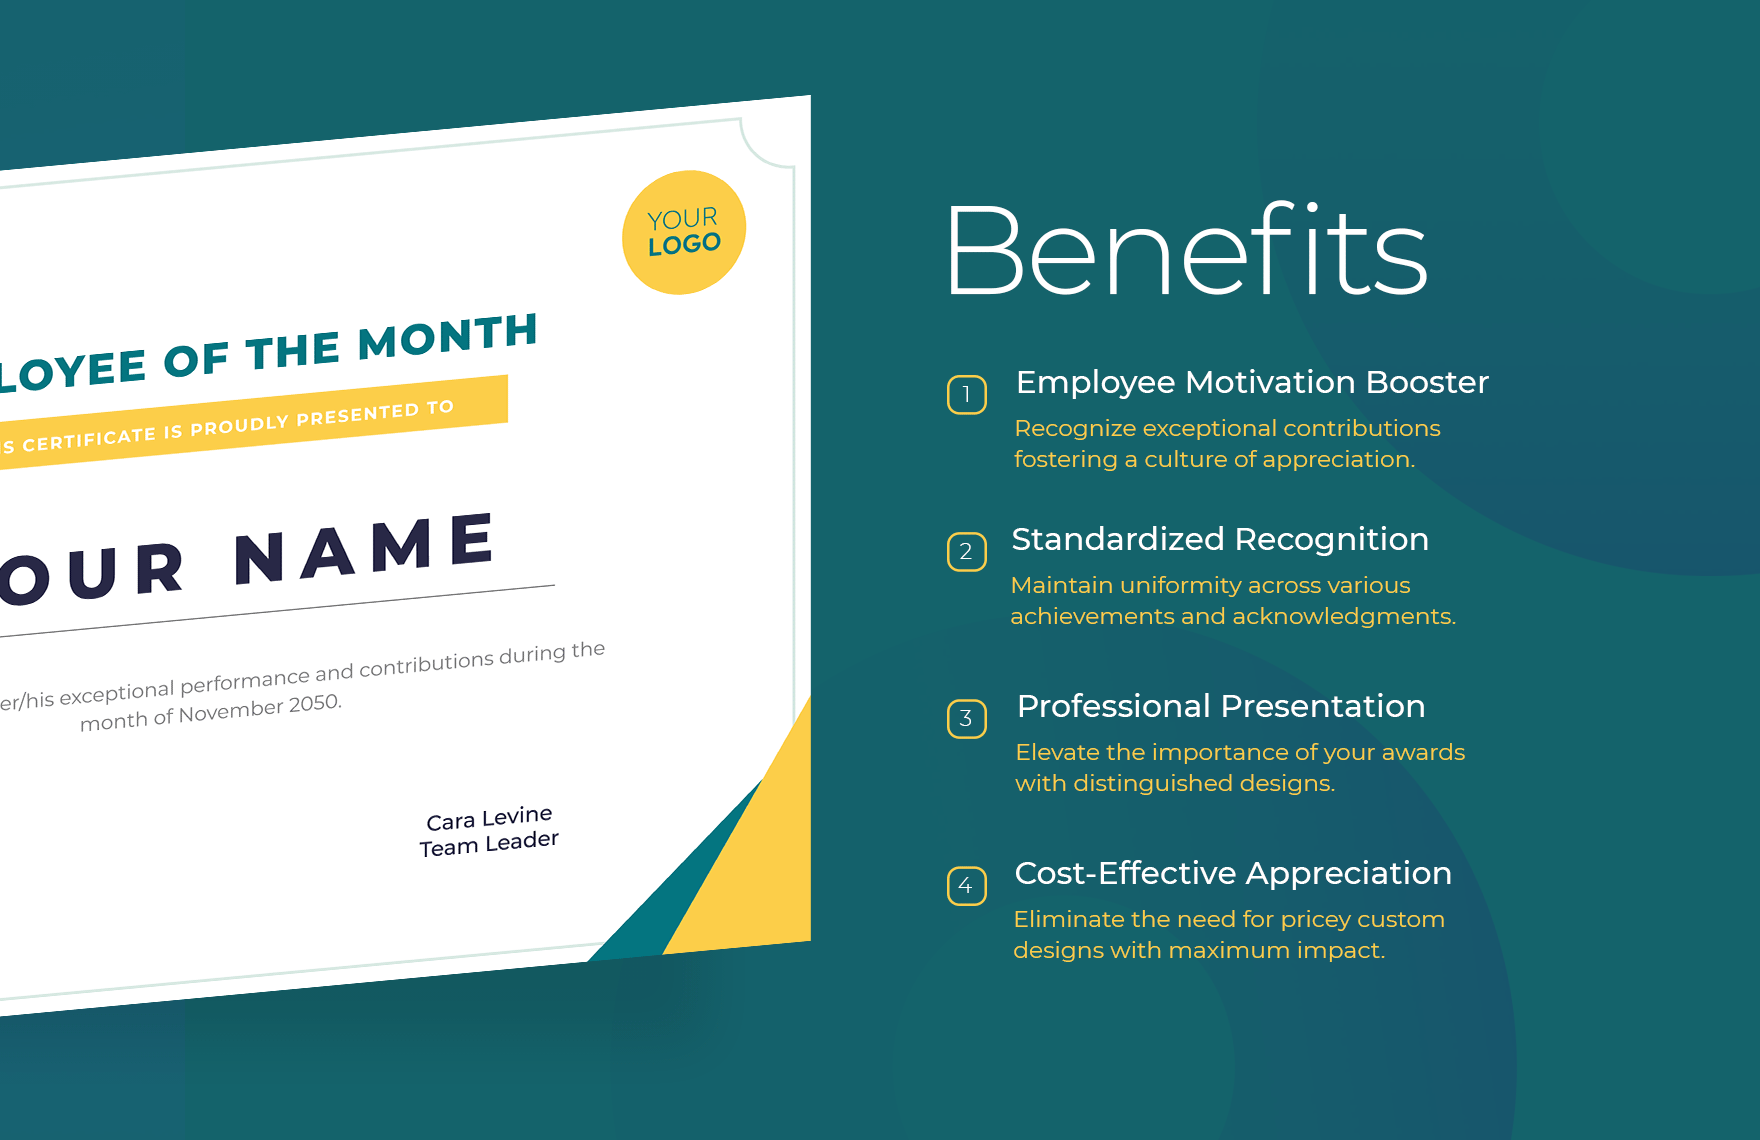 Employee Of The Month Certificate HR Template